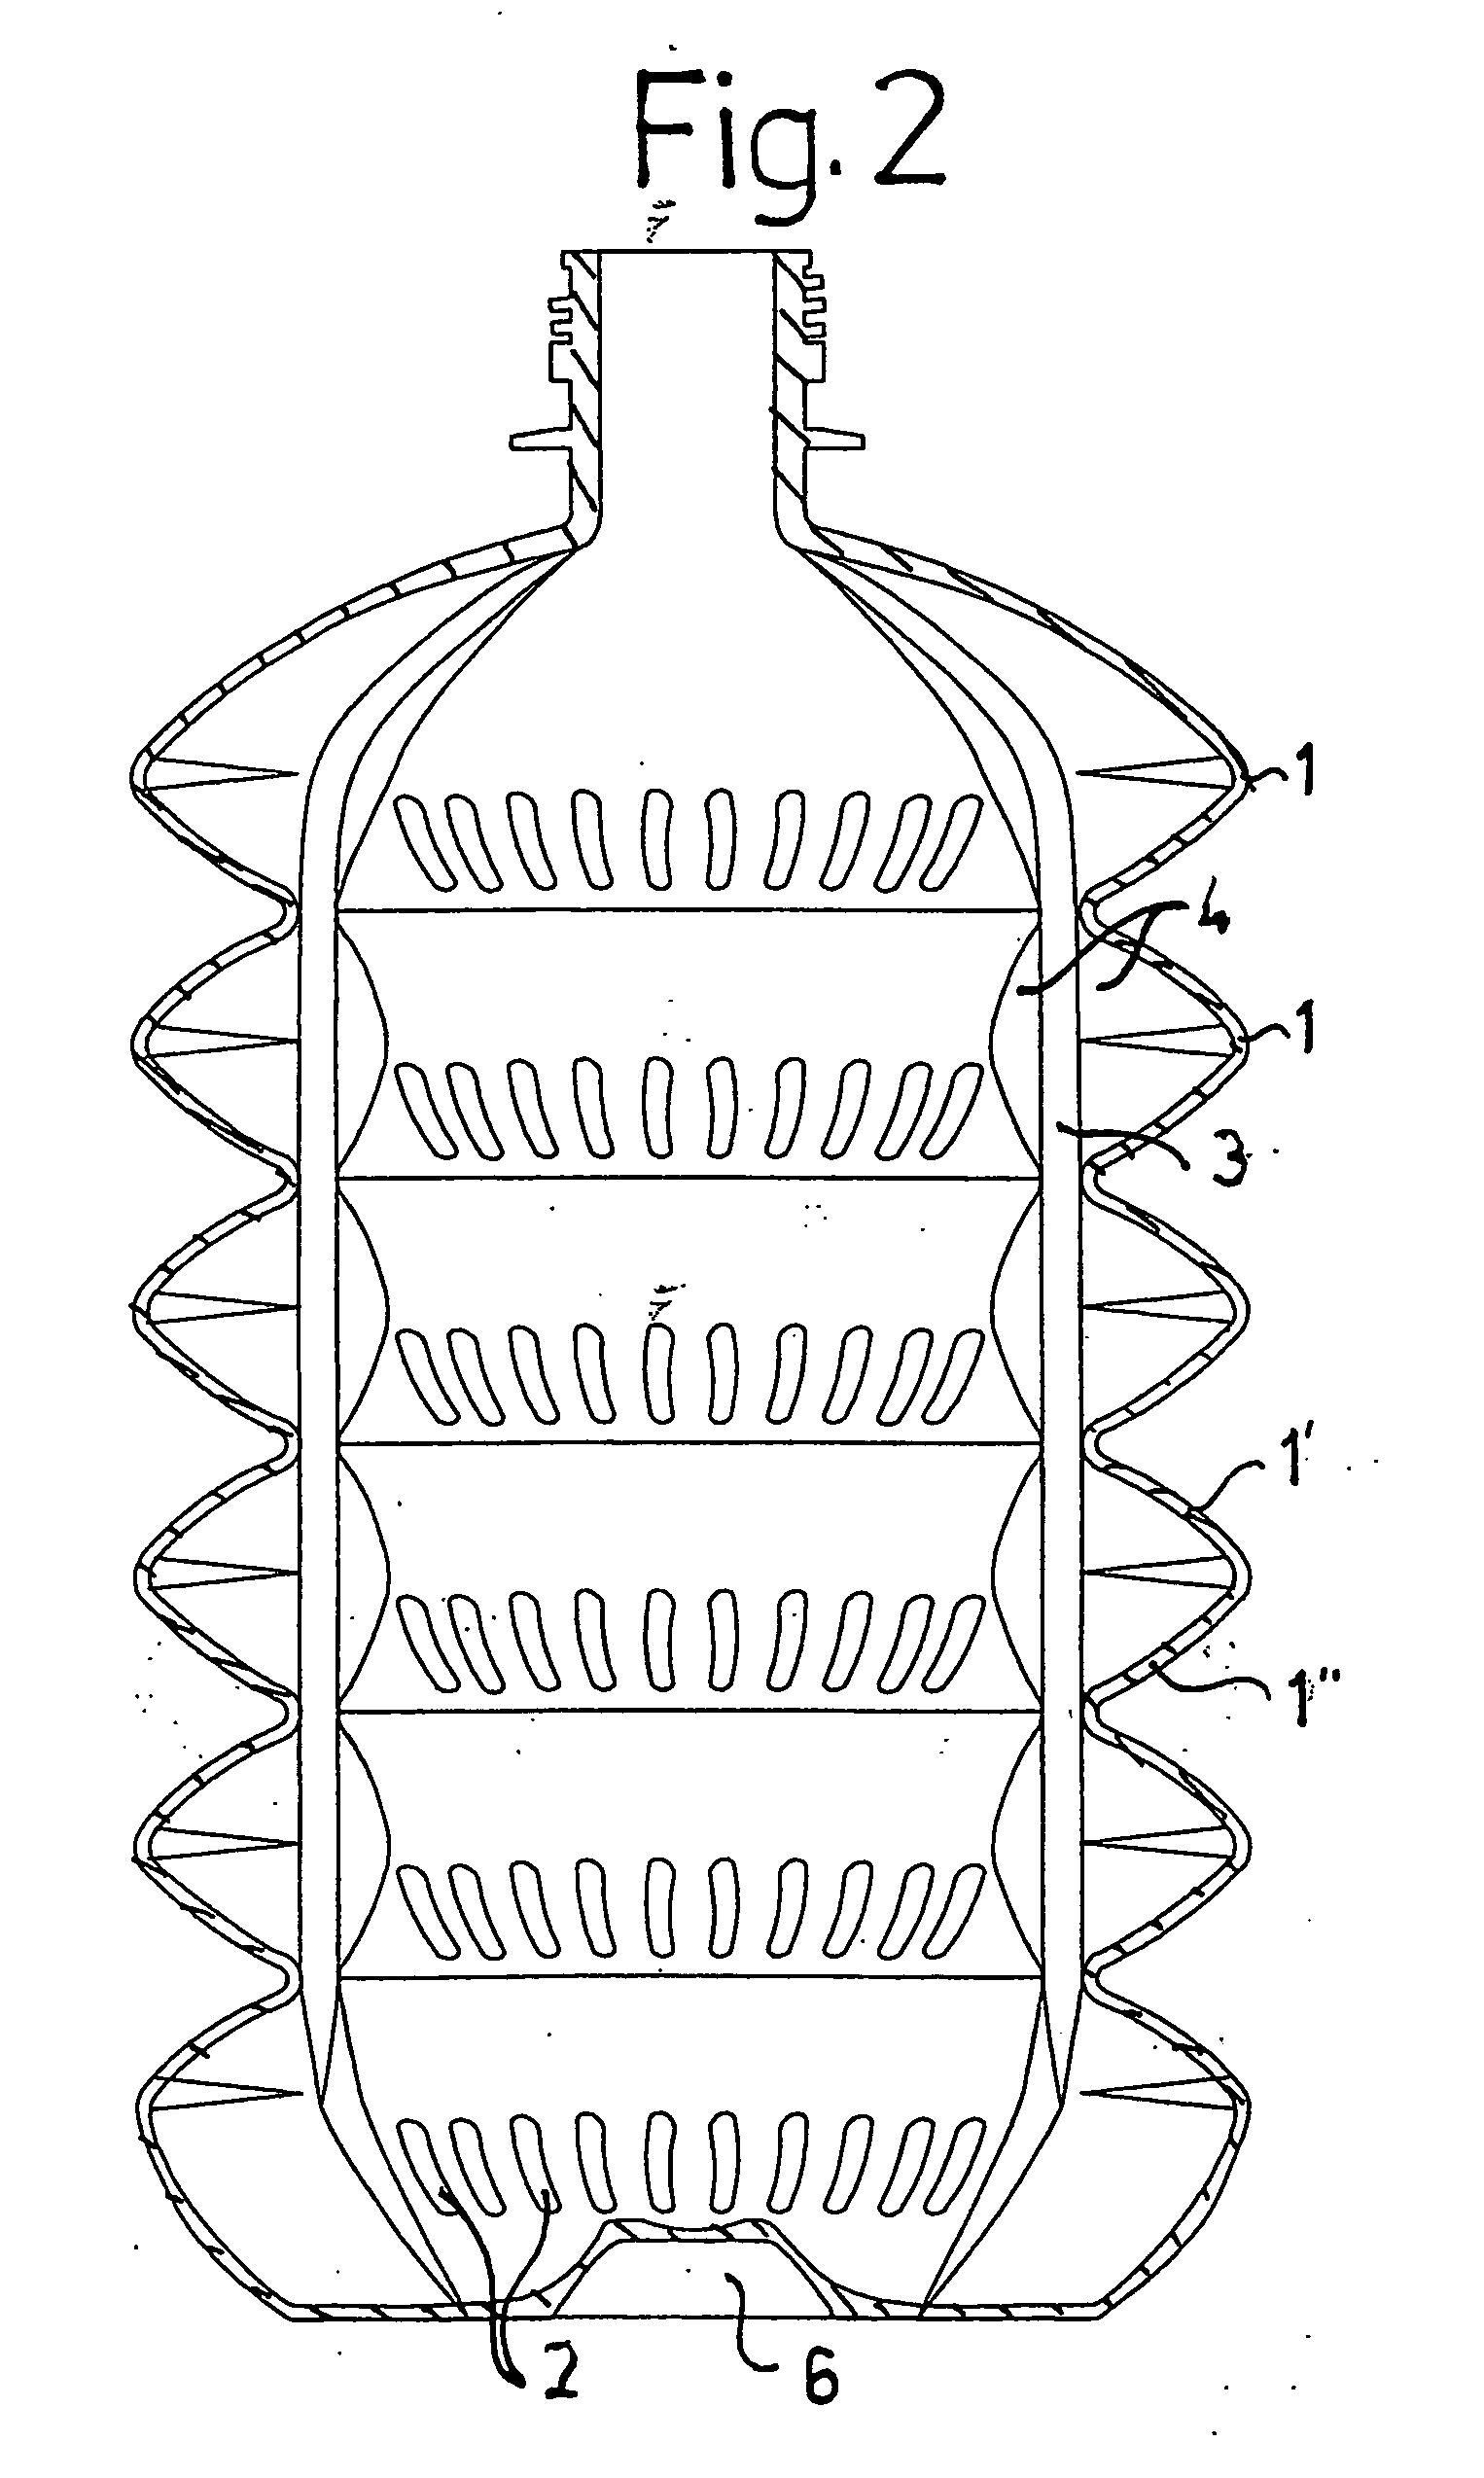 Plastic collapsible bottle with accordion-like arranged bellows ridges